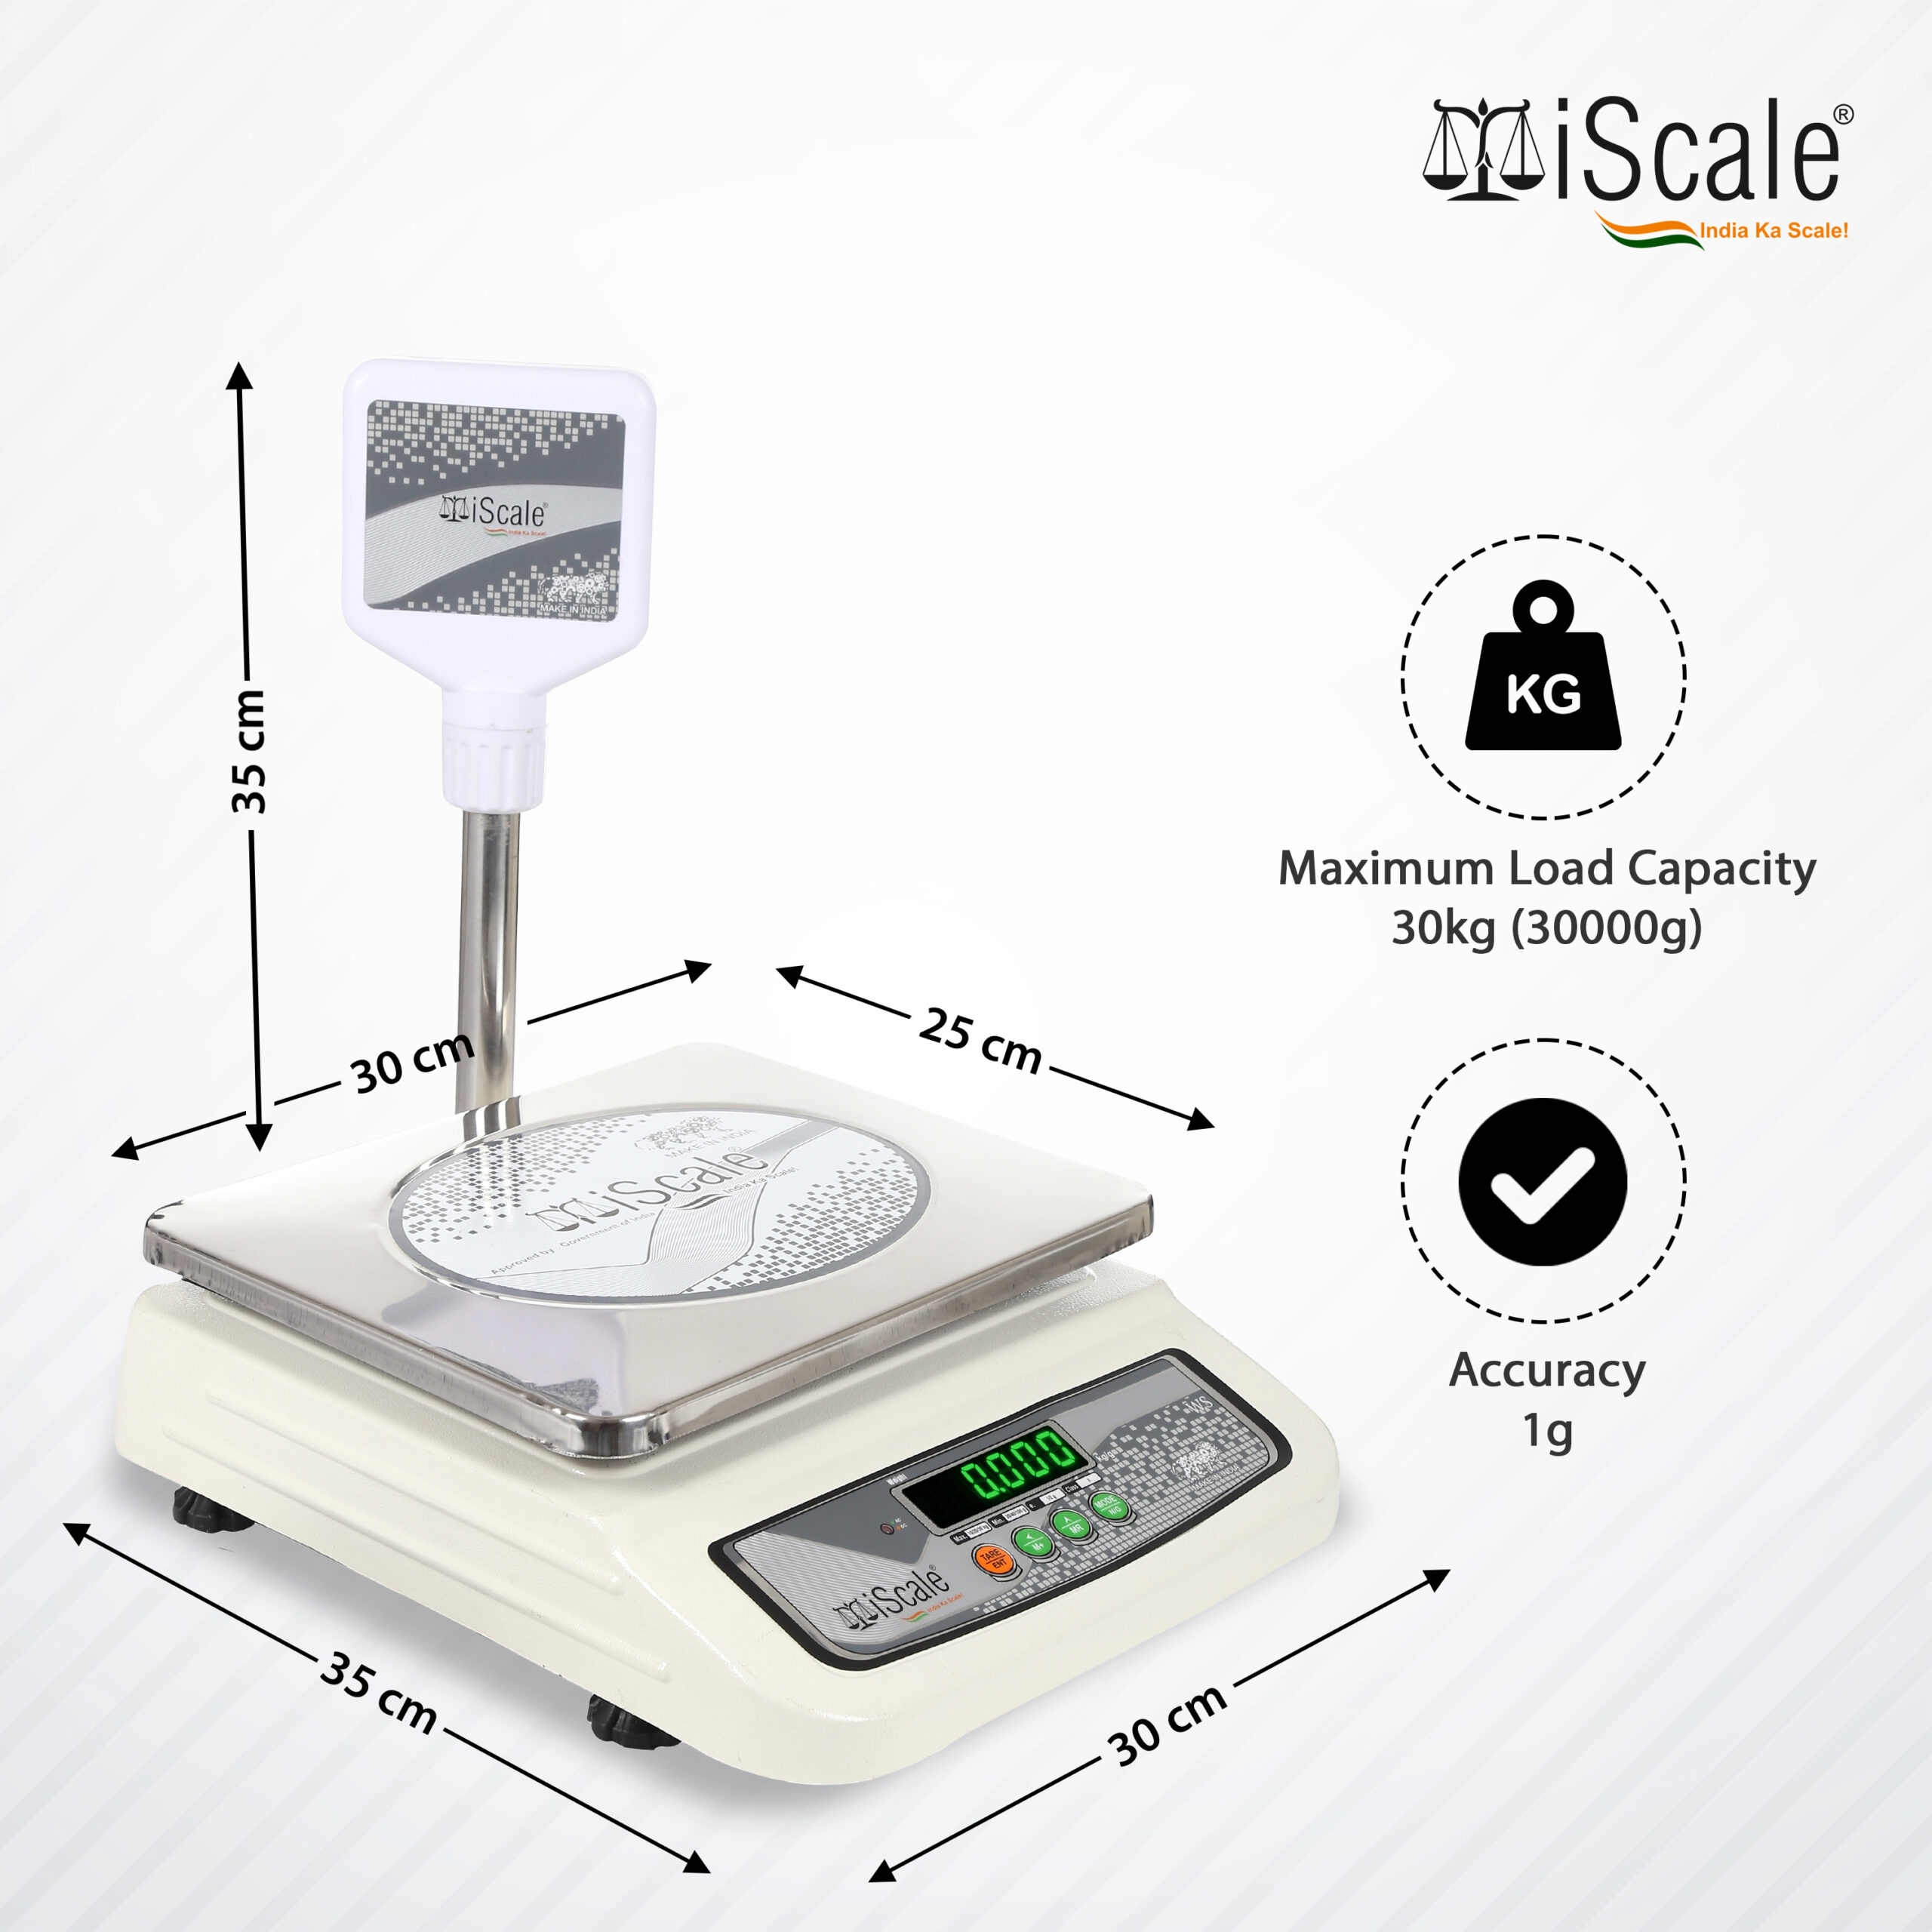 iScale i-05 Weight capacity 30kg x 1g Digital Weighing Machine / Weighing Scale with Front and Pole Double Display (Green), With Stainless Steel Pan size 10×12 inches, 250x300mm for Shop, Kitchen and Commercial Purposes